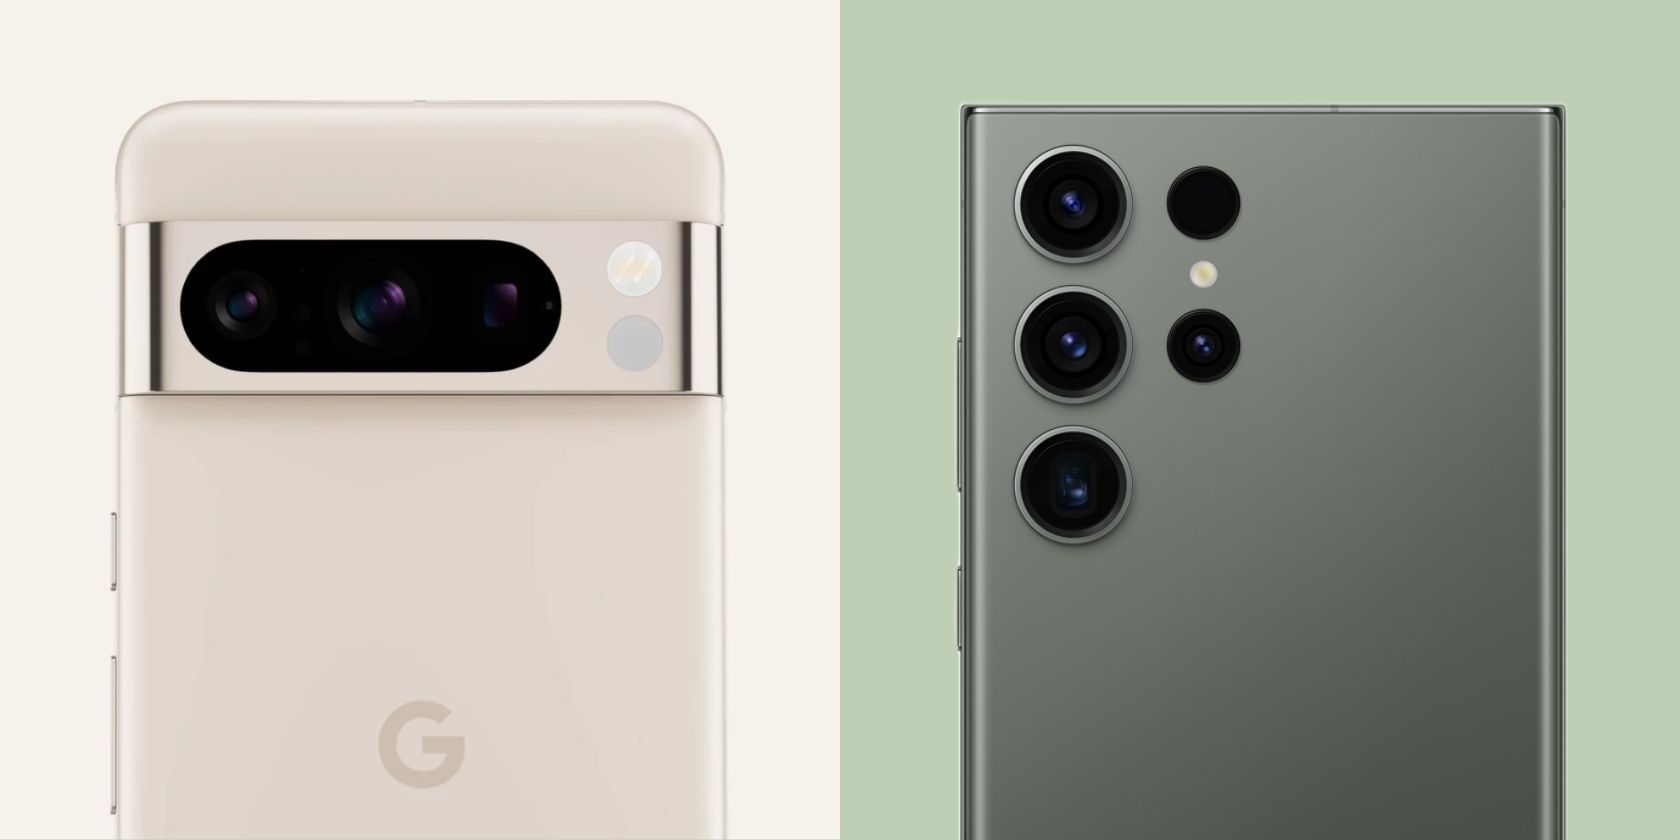 Google Pixel 8 Pro vs. Galaxy S23 Ultra: Which Should You Buy?